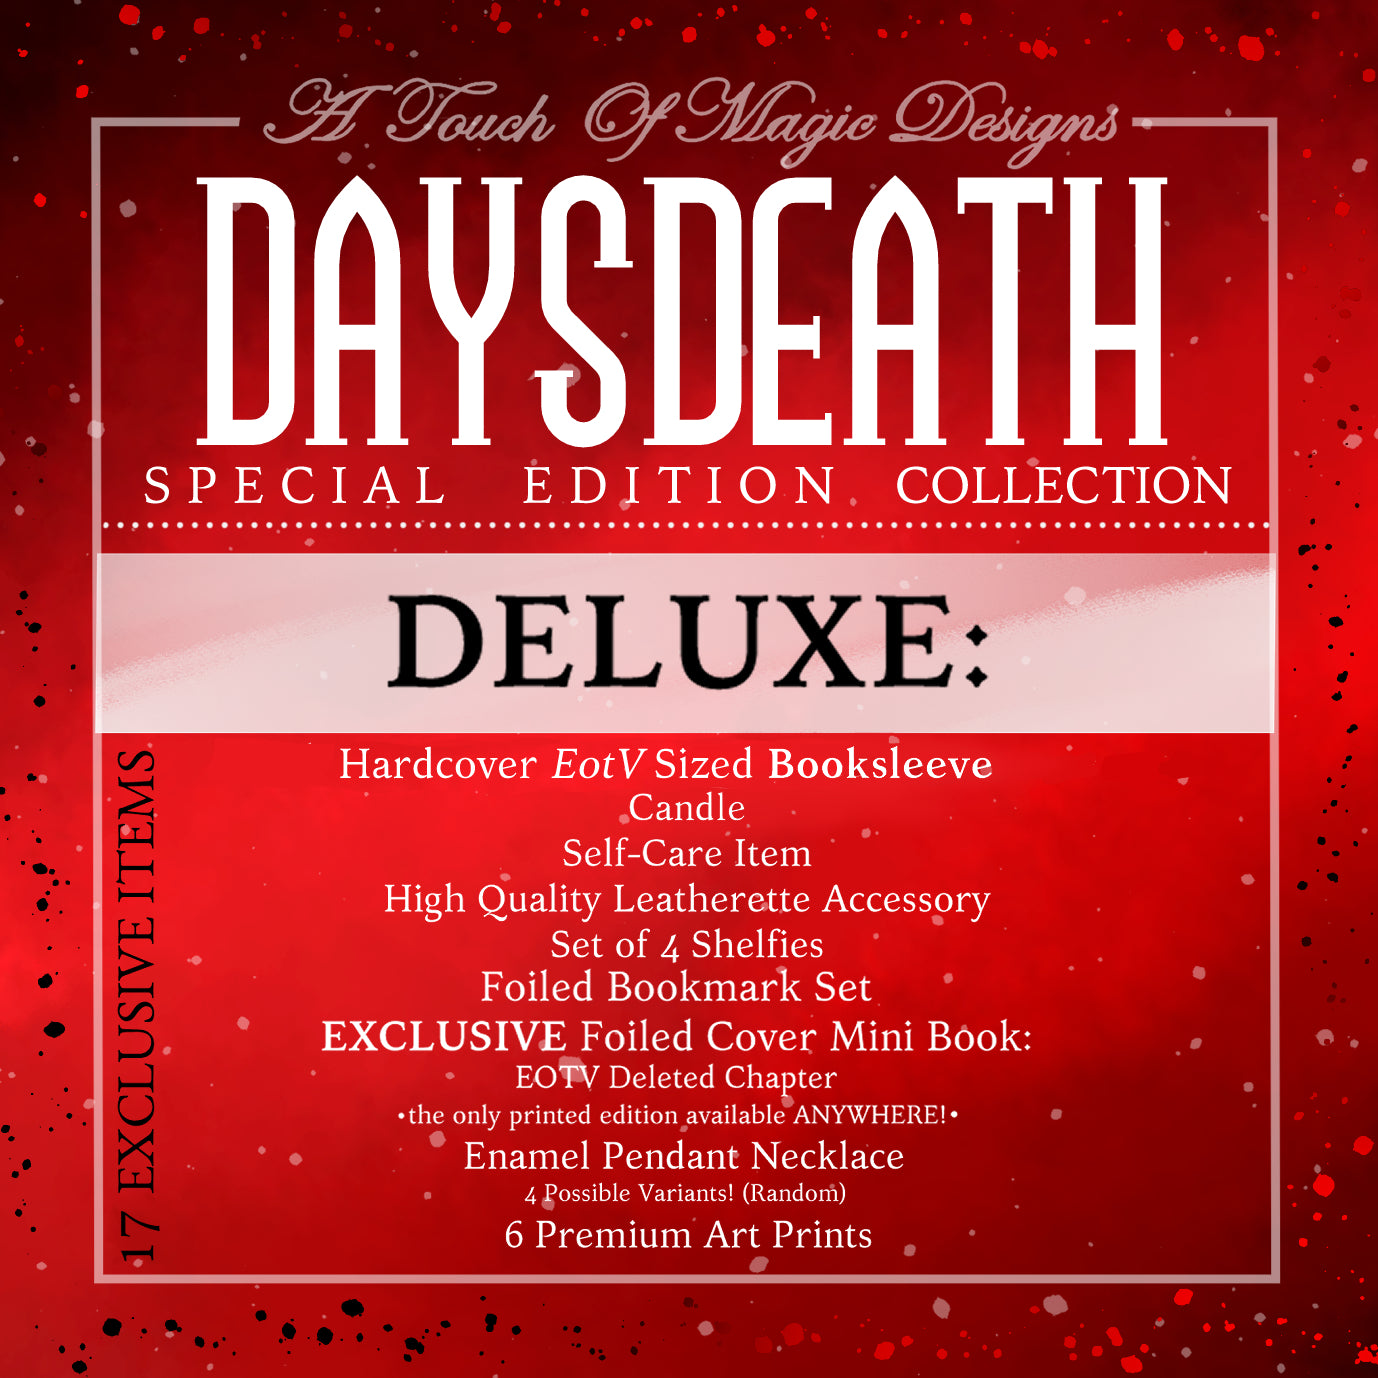 Eotv special edition collection -
Deluxe